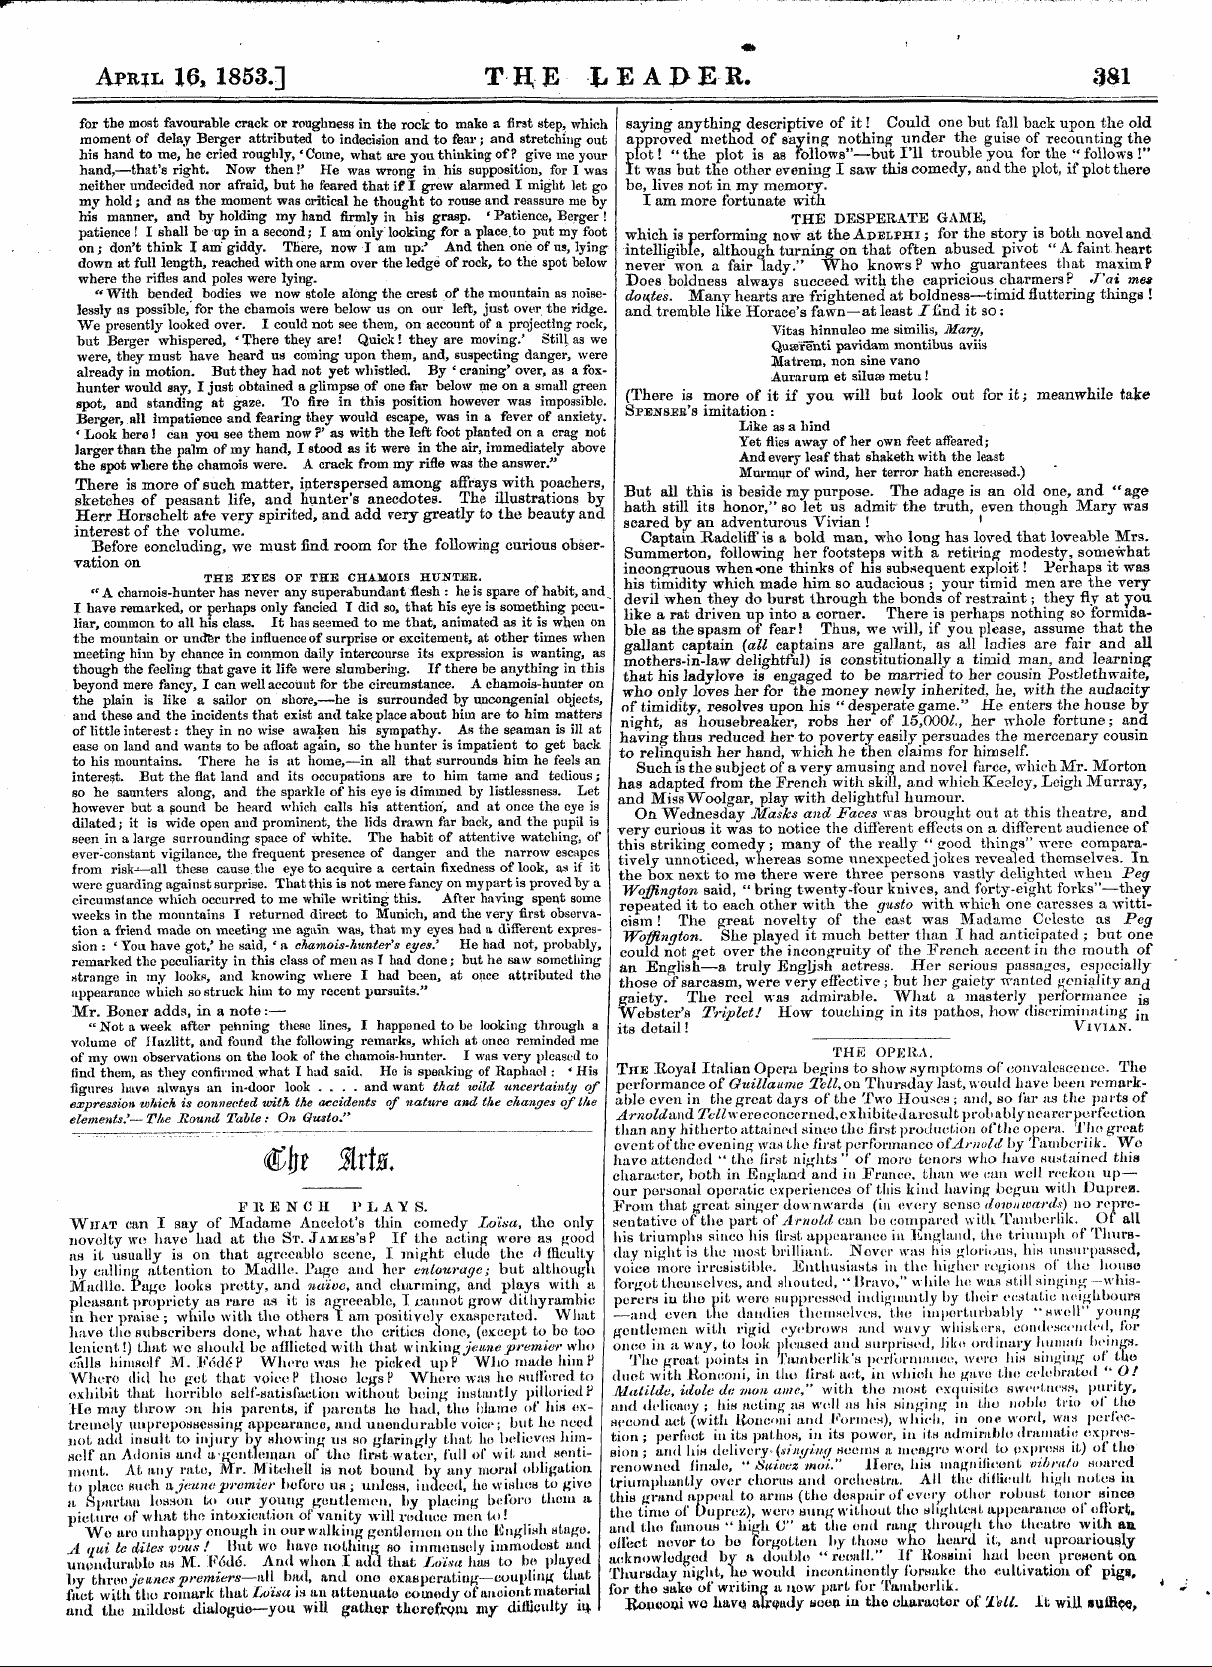 Leader (1850-1860): jS F Y, 1st edition: 21